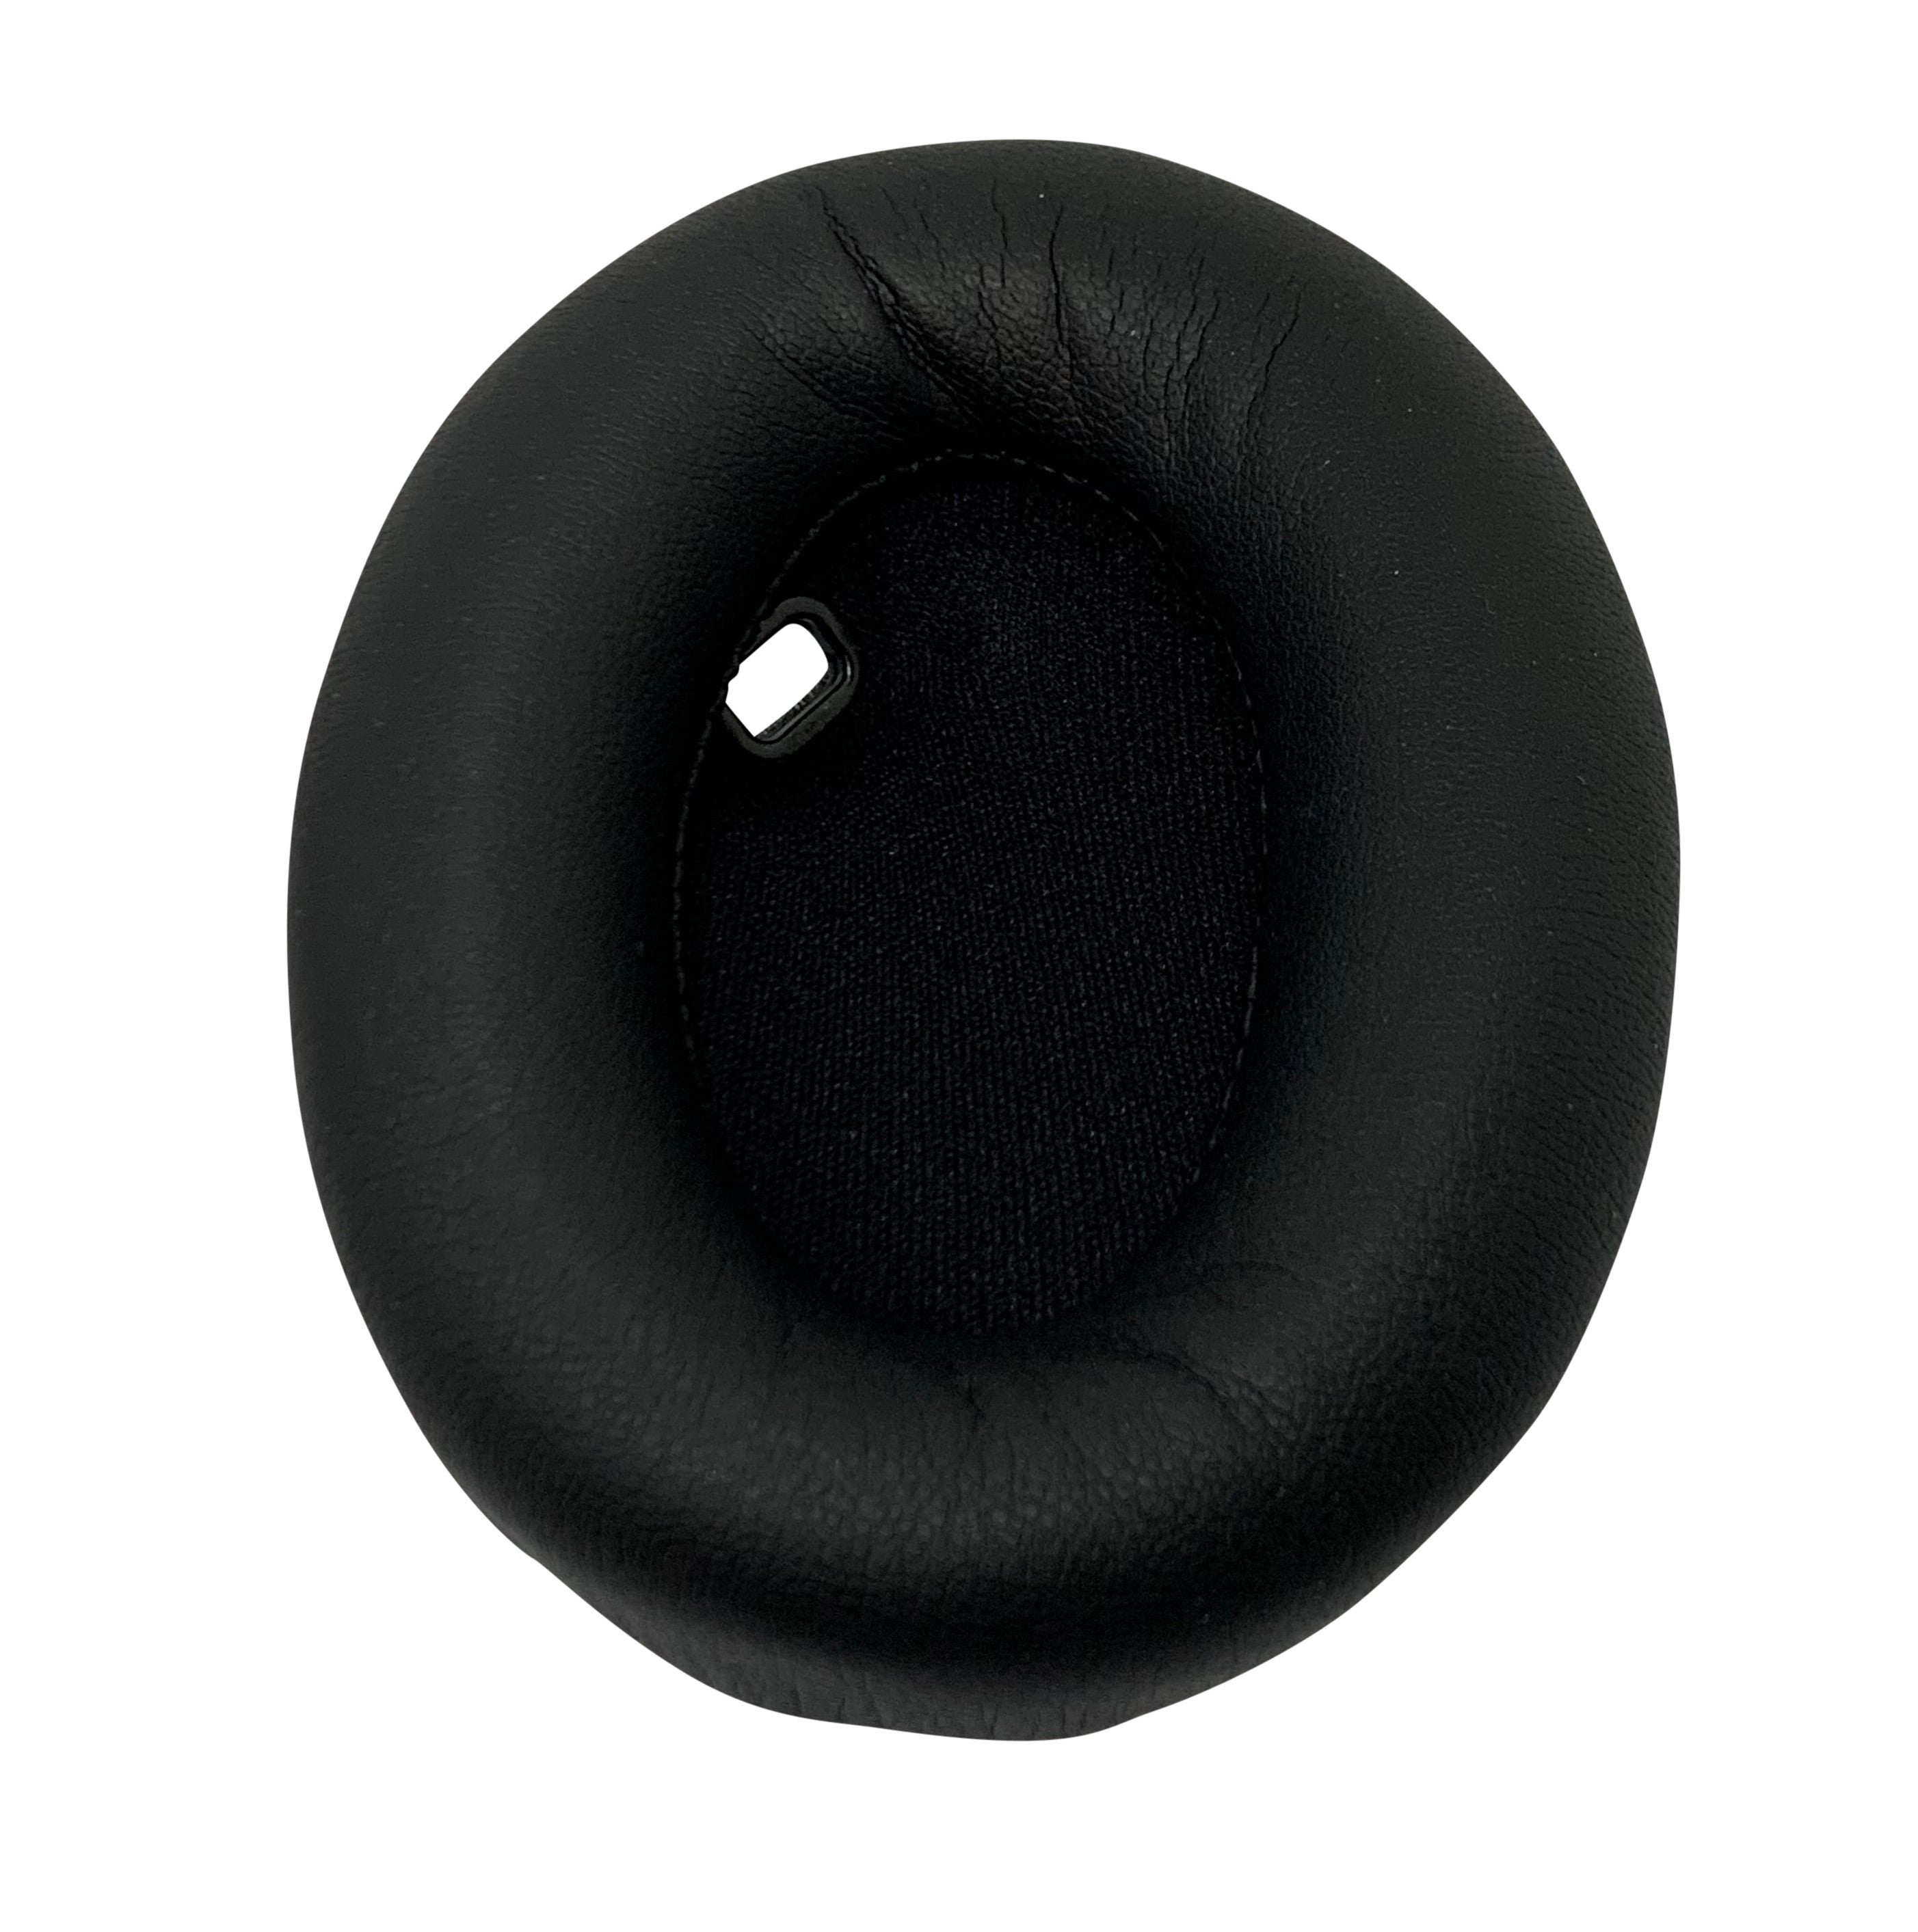 CentralSound Replacement Ear Pad Cushions for Sony WH-1000XM4 Headphones - CentralSound